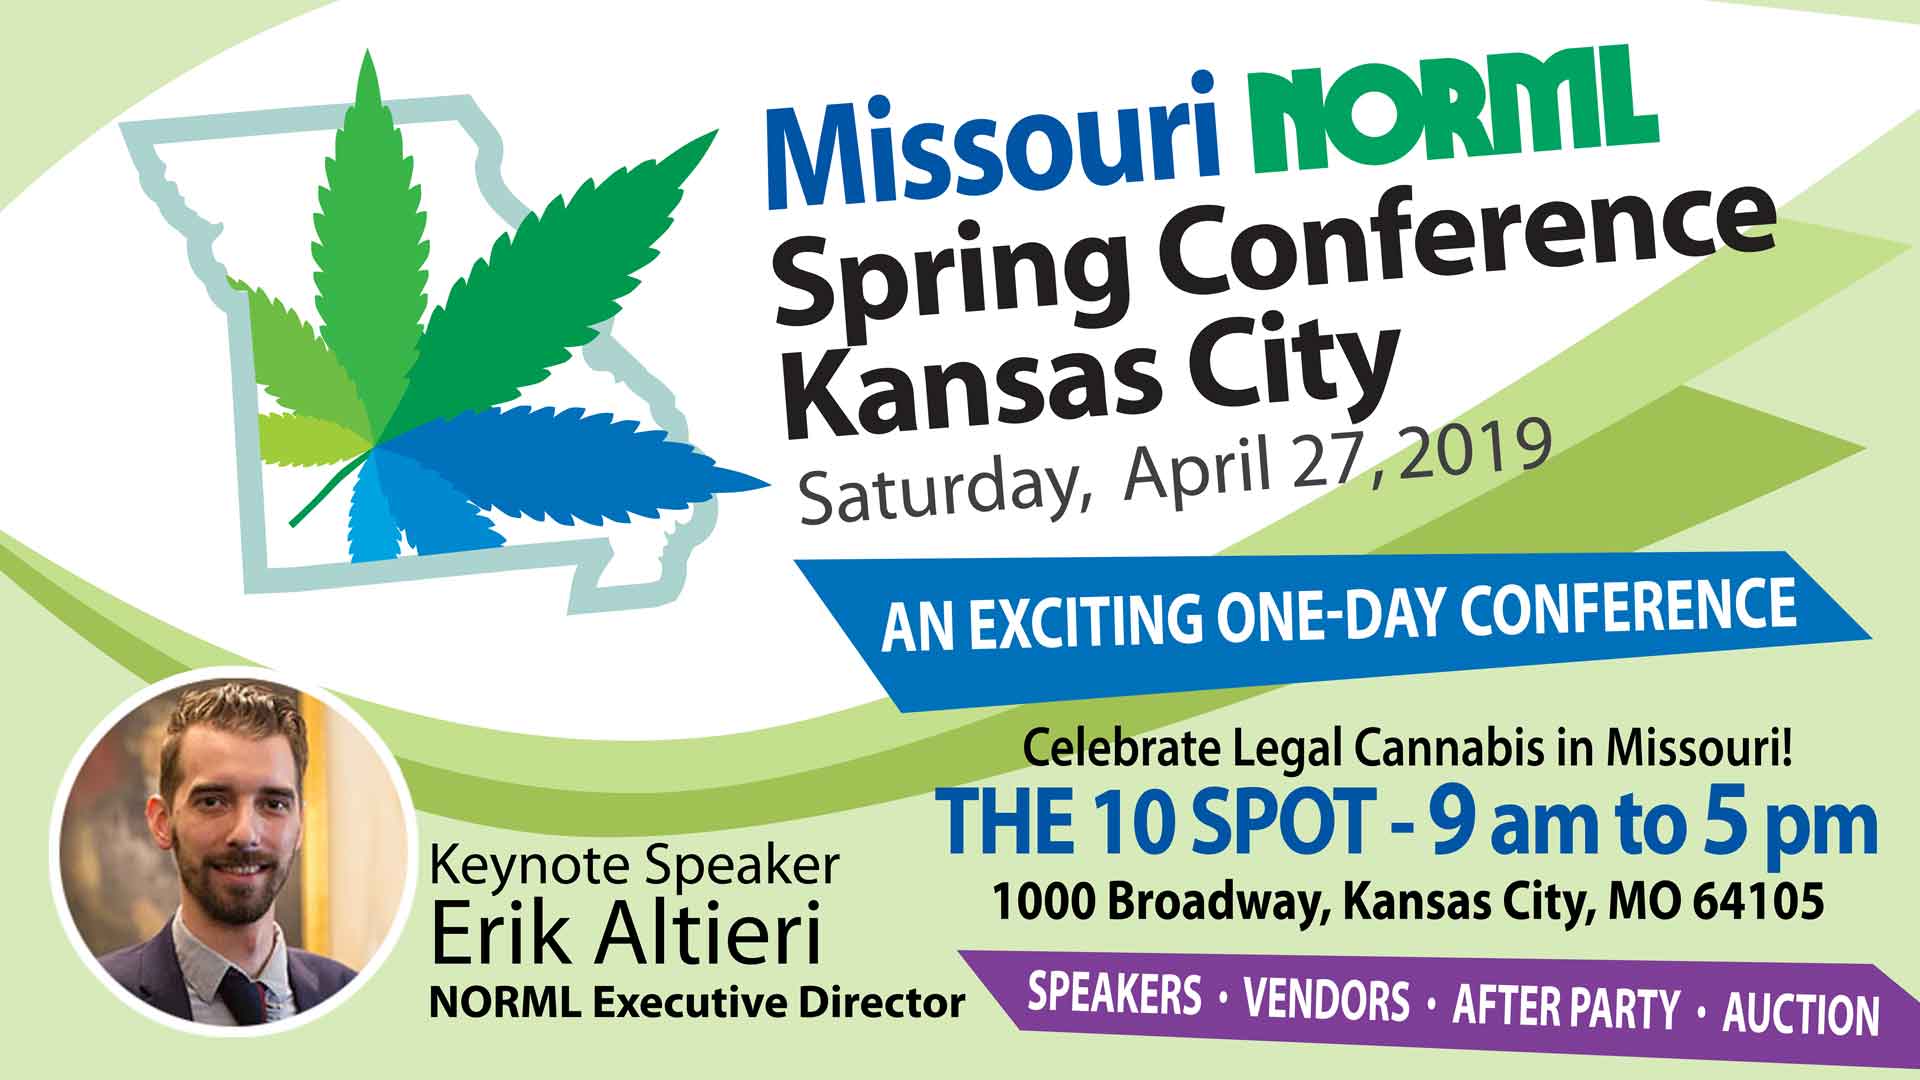 Missouri NORML Spring Conference in Kansas City, MO